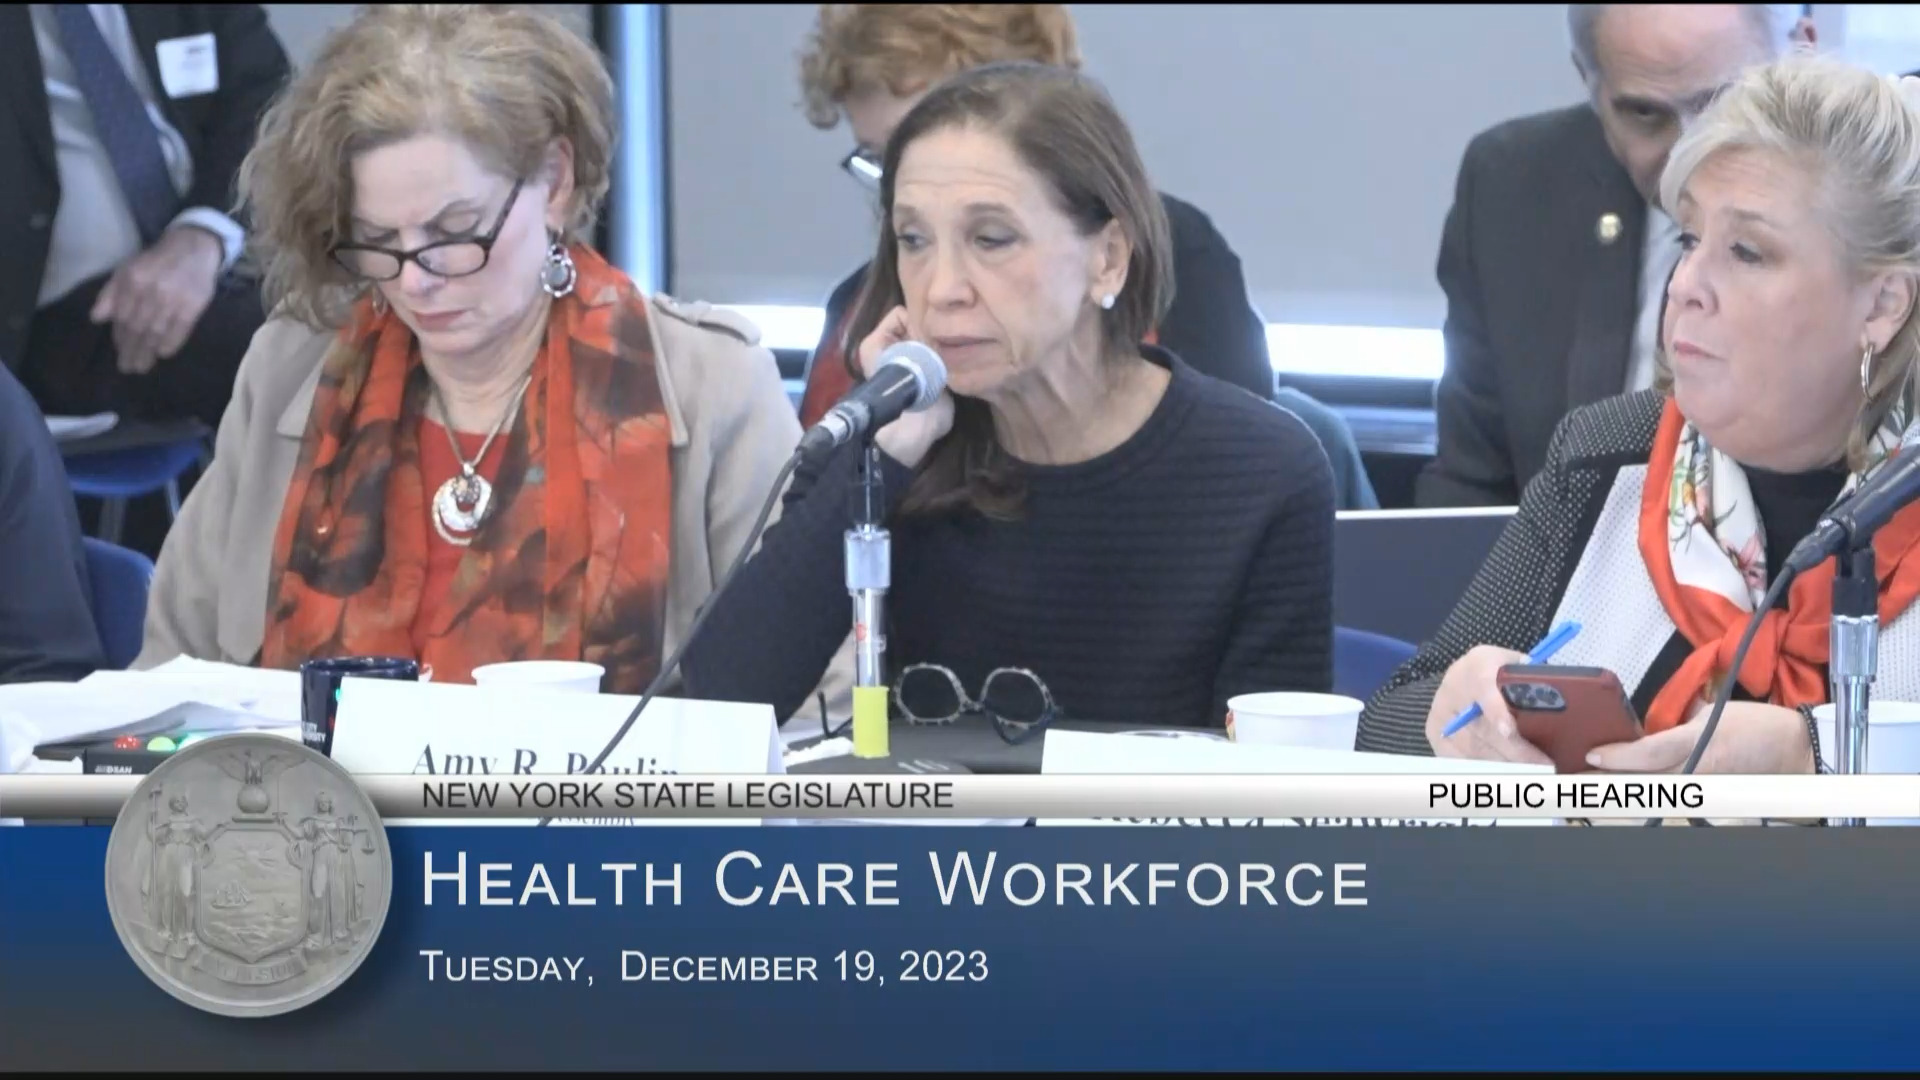 Healthcare Union Members Testify at Public Hearing on Status of the Health Care Workforce in New York State